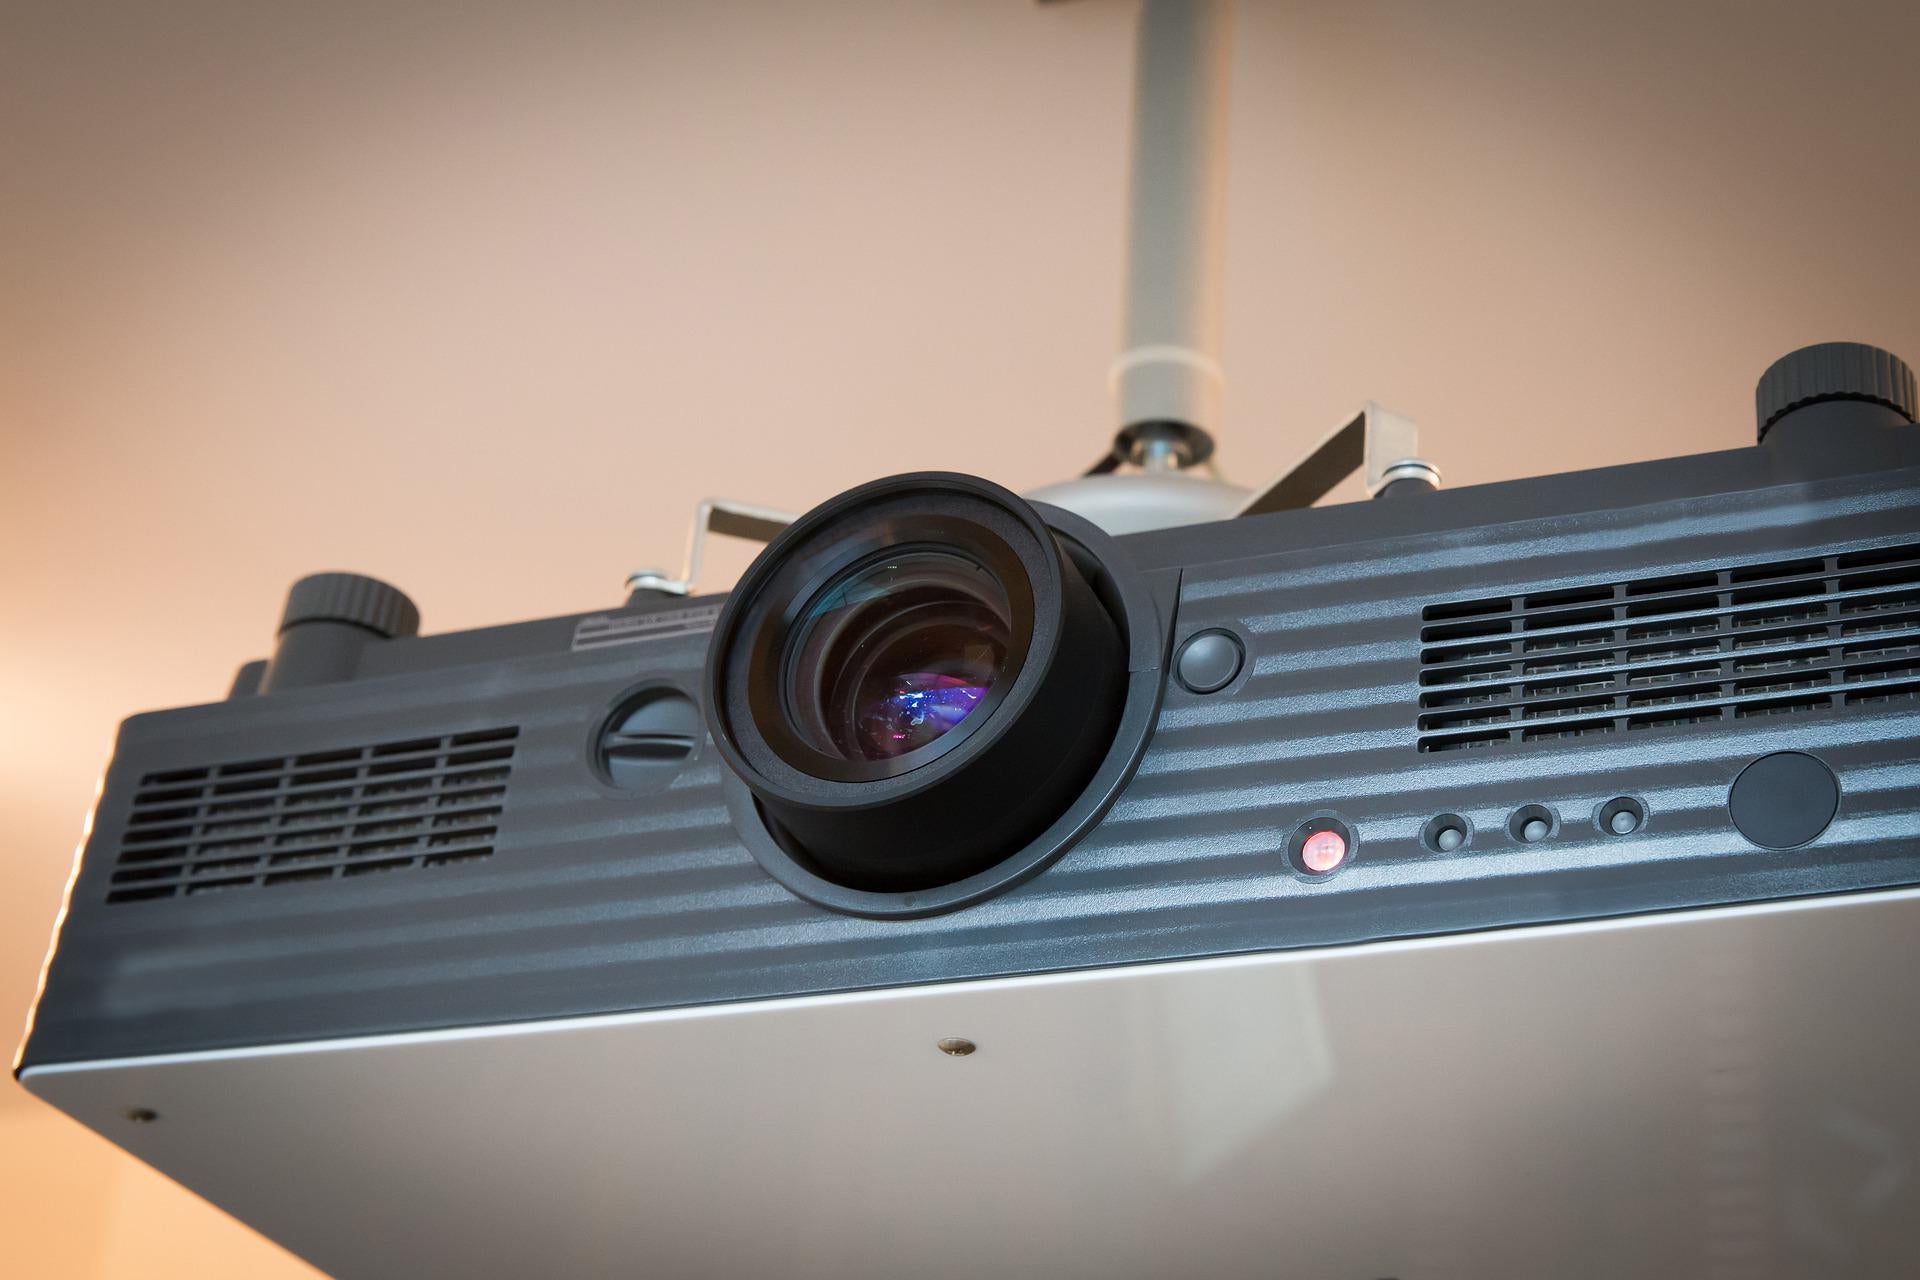 What is the imaging principle of the projector lens?